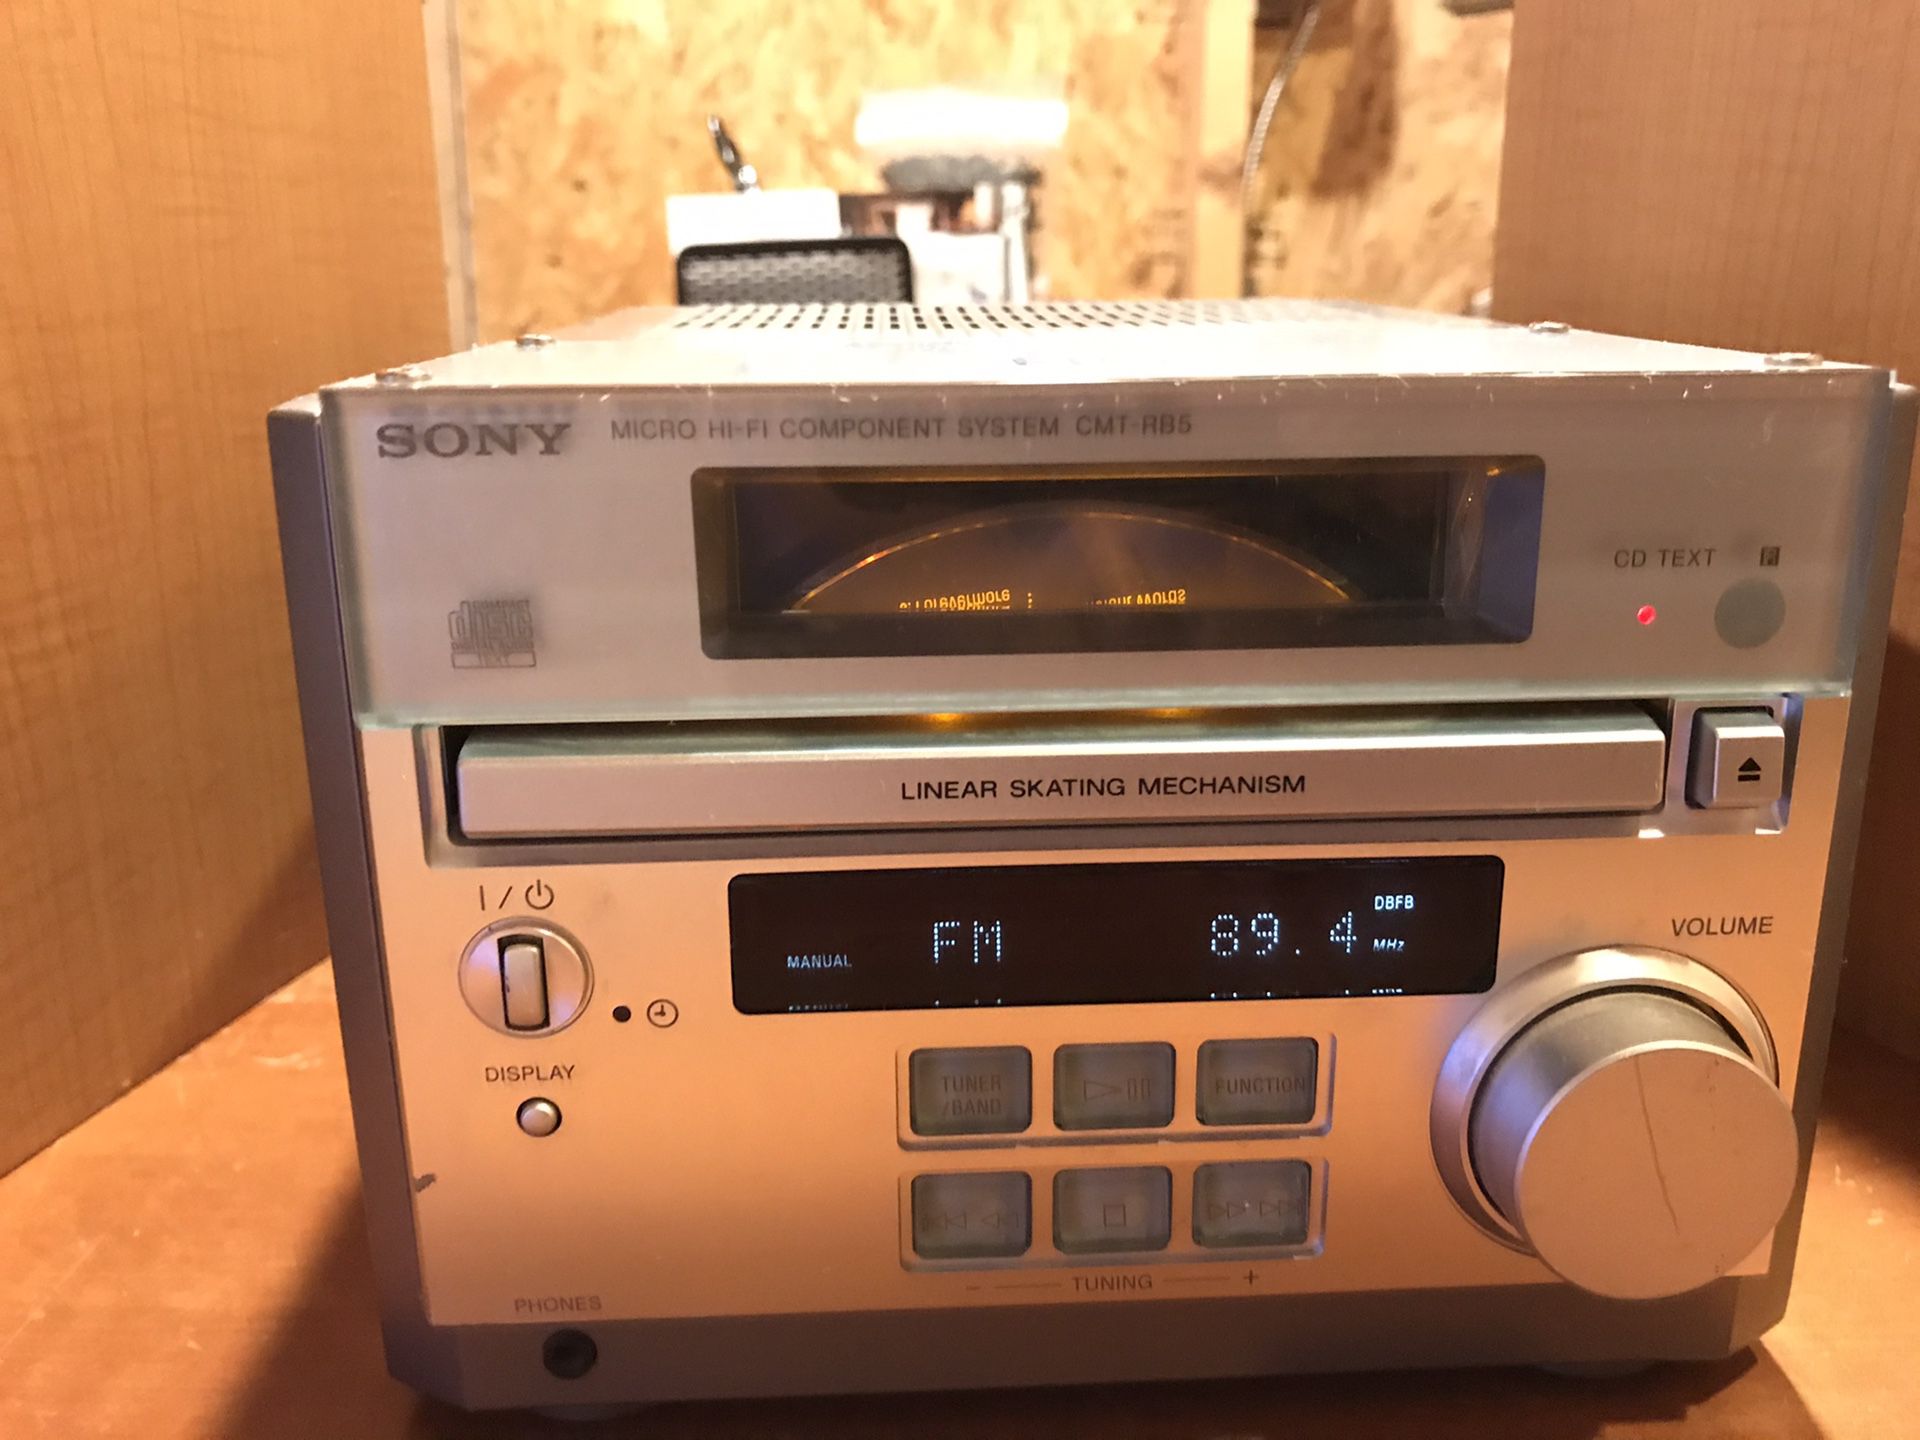 Sony Micro Hi-Fi Component stereo system